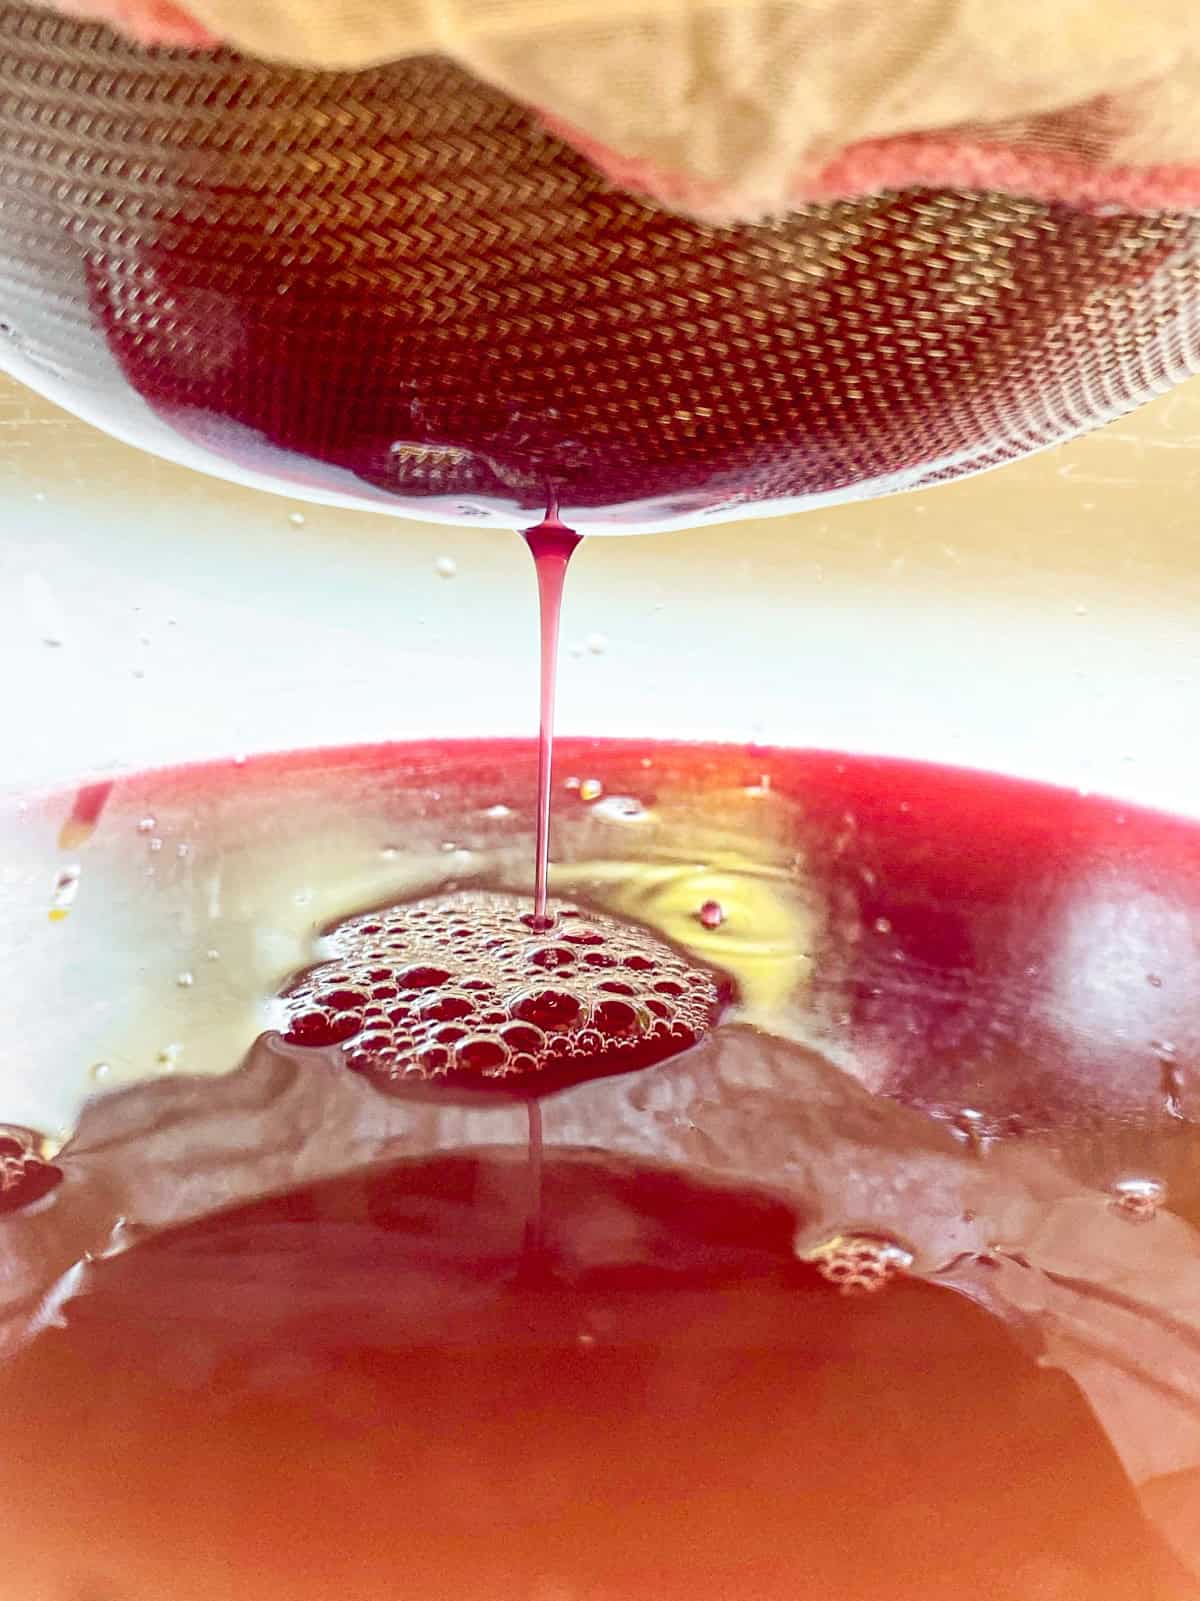 A close up image of cooked rhubarb being strained through cheesecloth and a mesh strainer over a glass bowl.